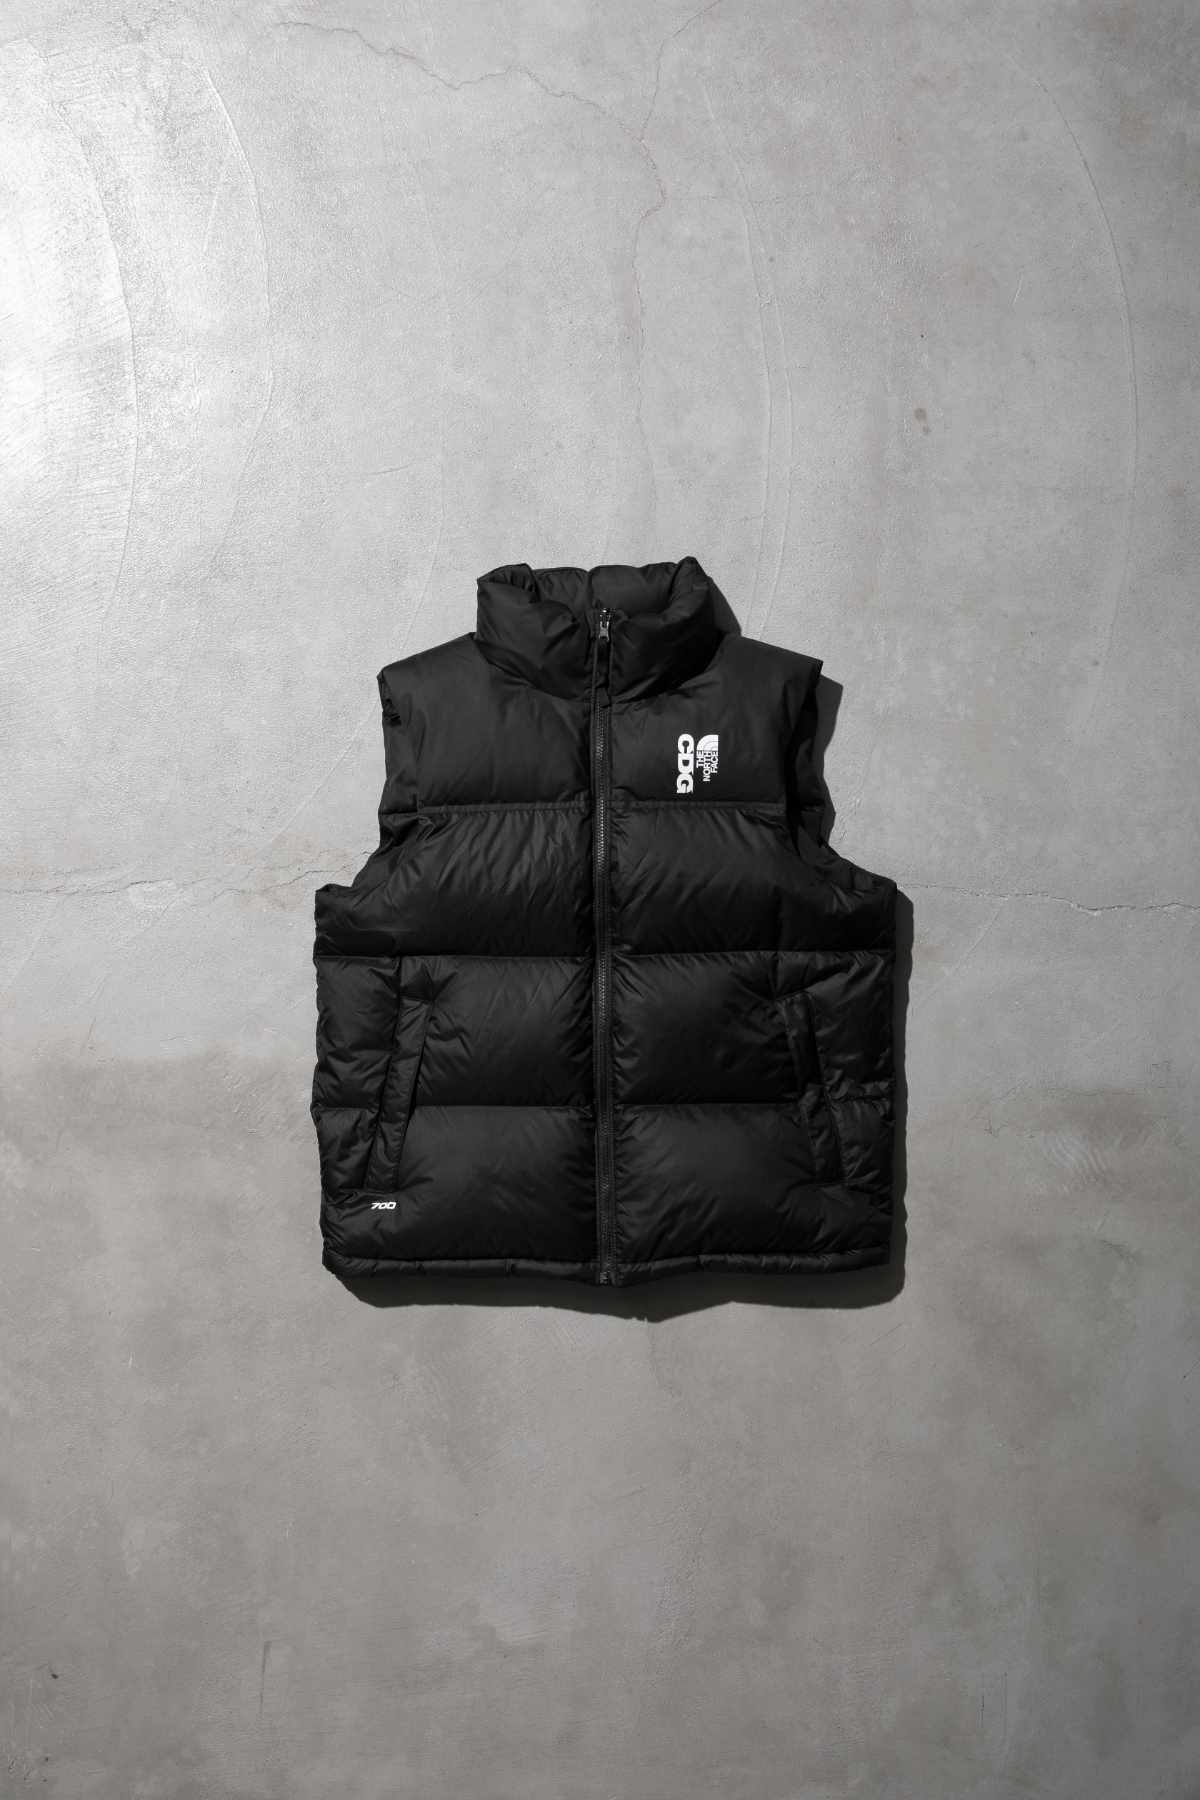 The CDG x TNF puffer vest collaboration